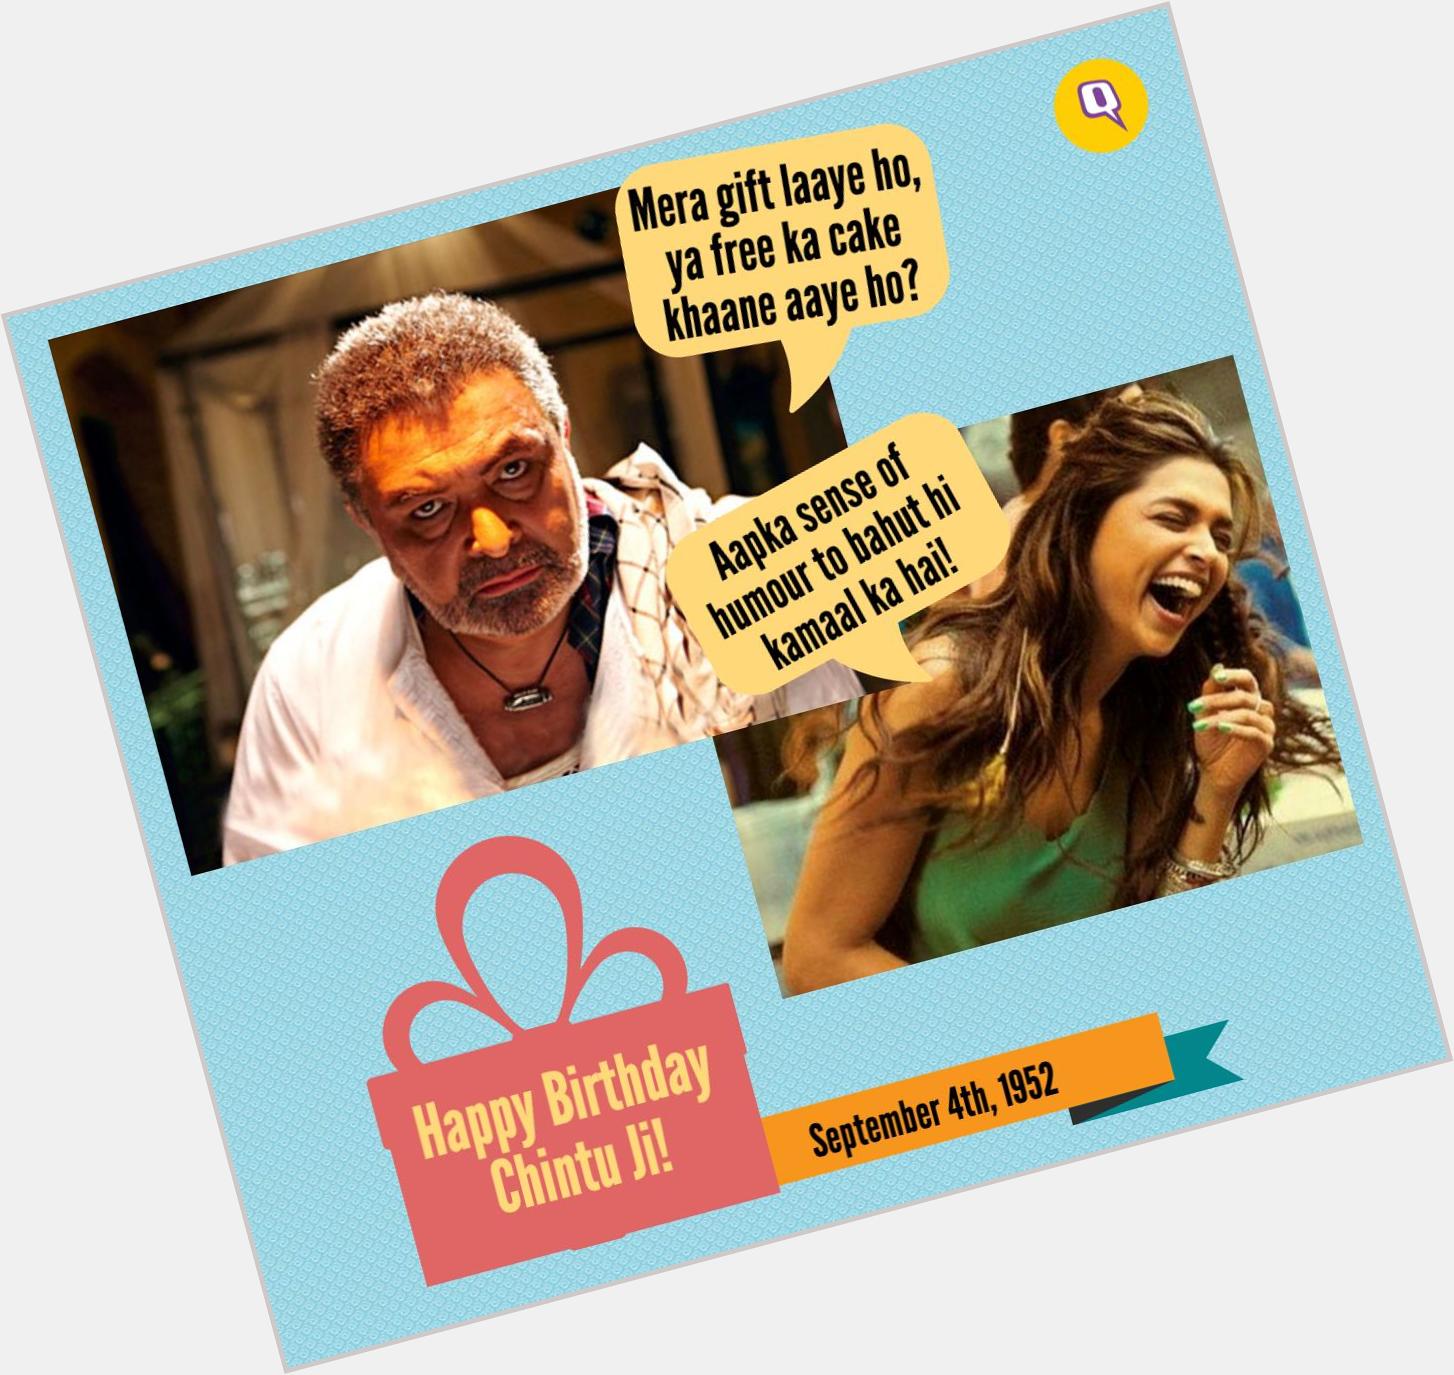 6 messages that say got a great sense of humour! Happy Birthday 